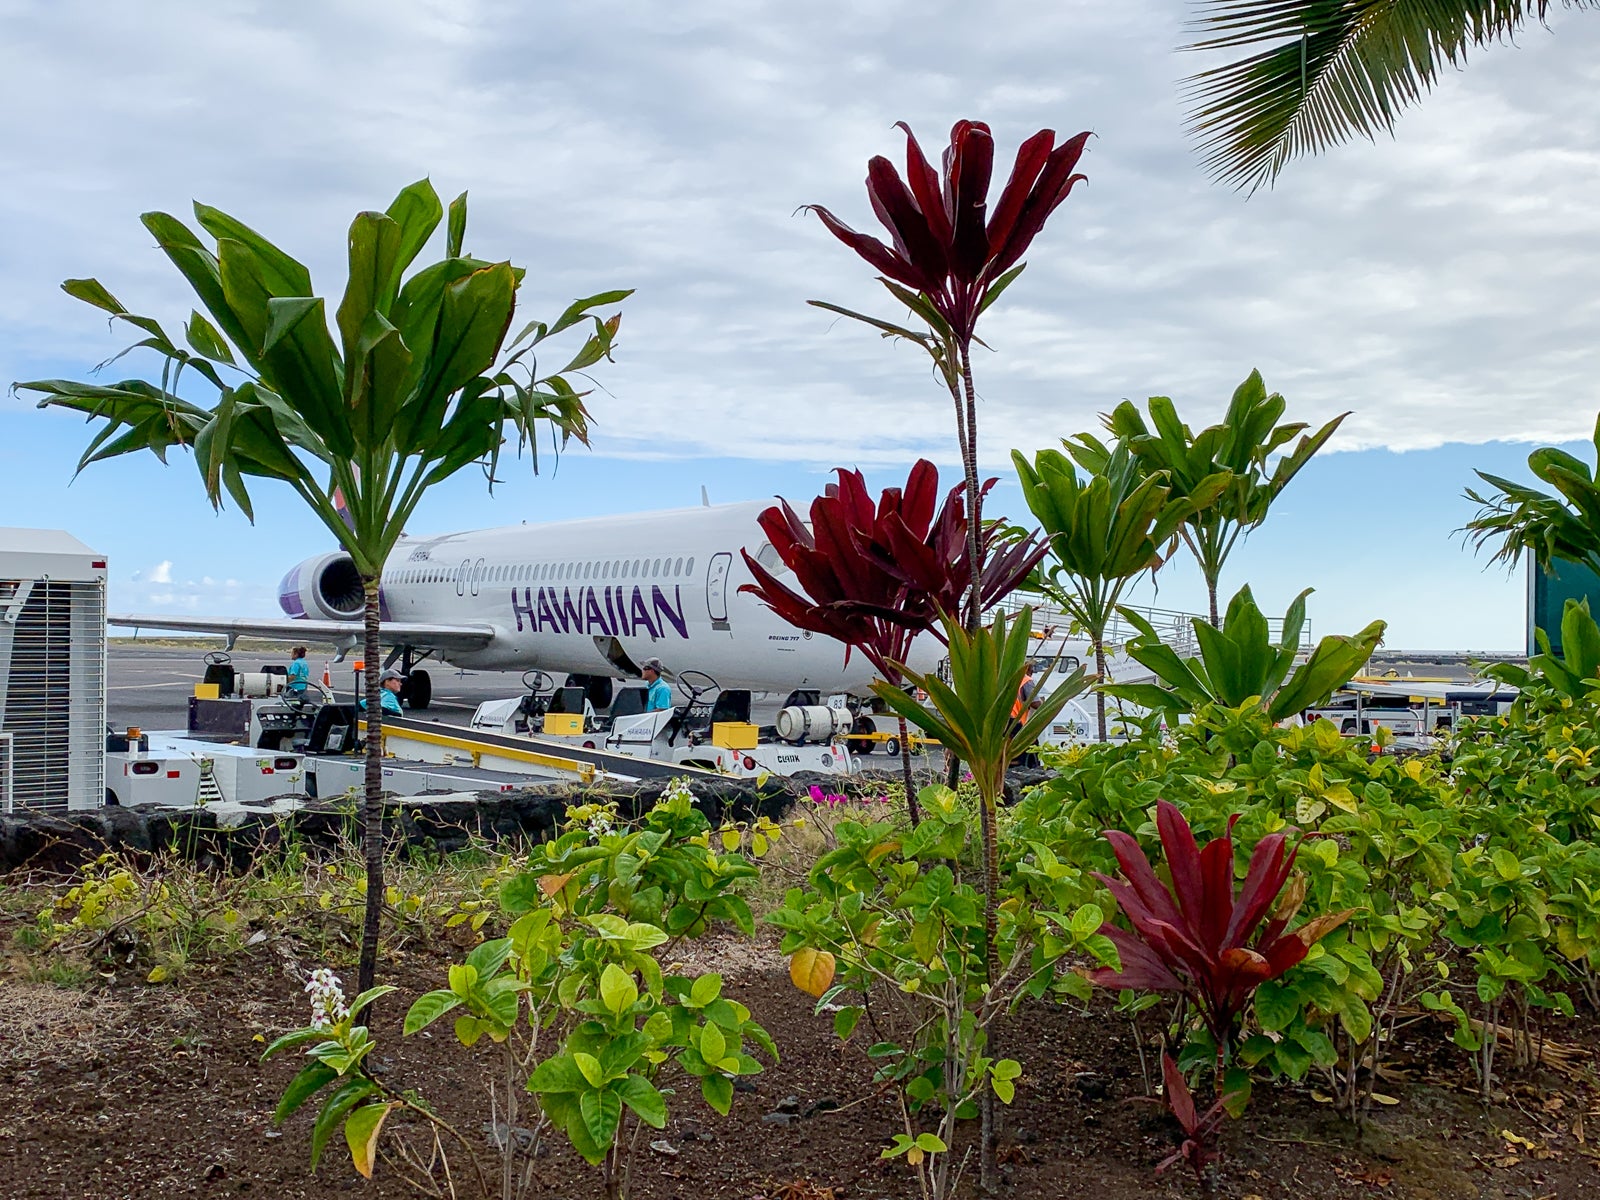 Hawaiian Airlines (Photo by Summer Hull/The Points Guy)